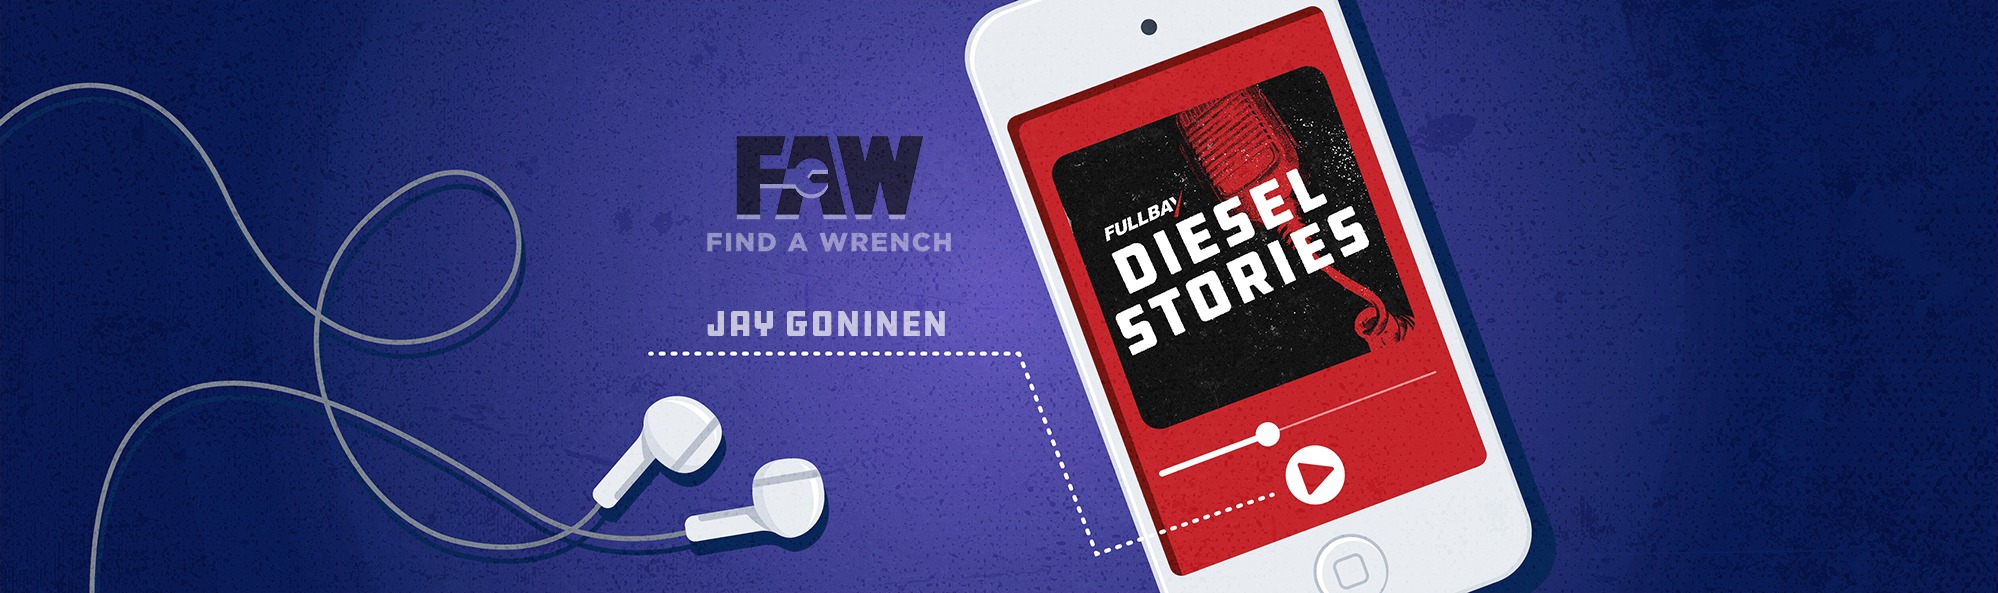 Diesel Stories Podcast Recap – Working on the Diesel Tech Shortage With Jay Goninen